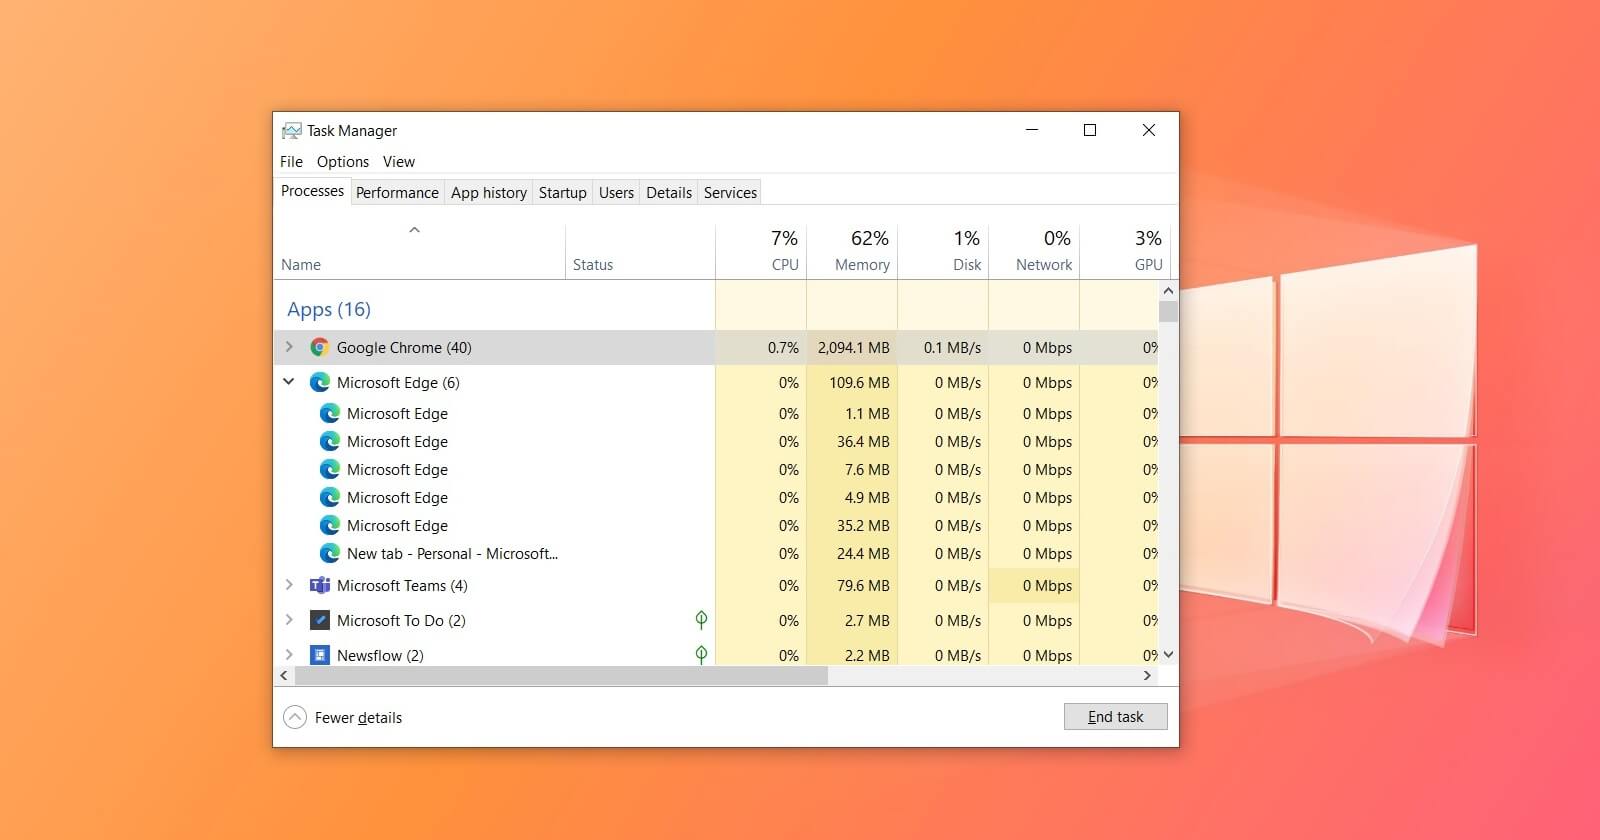 Windows Manager is getting a big upgrade with new features